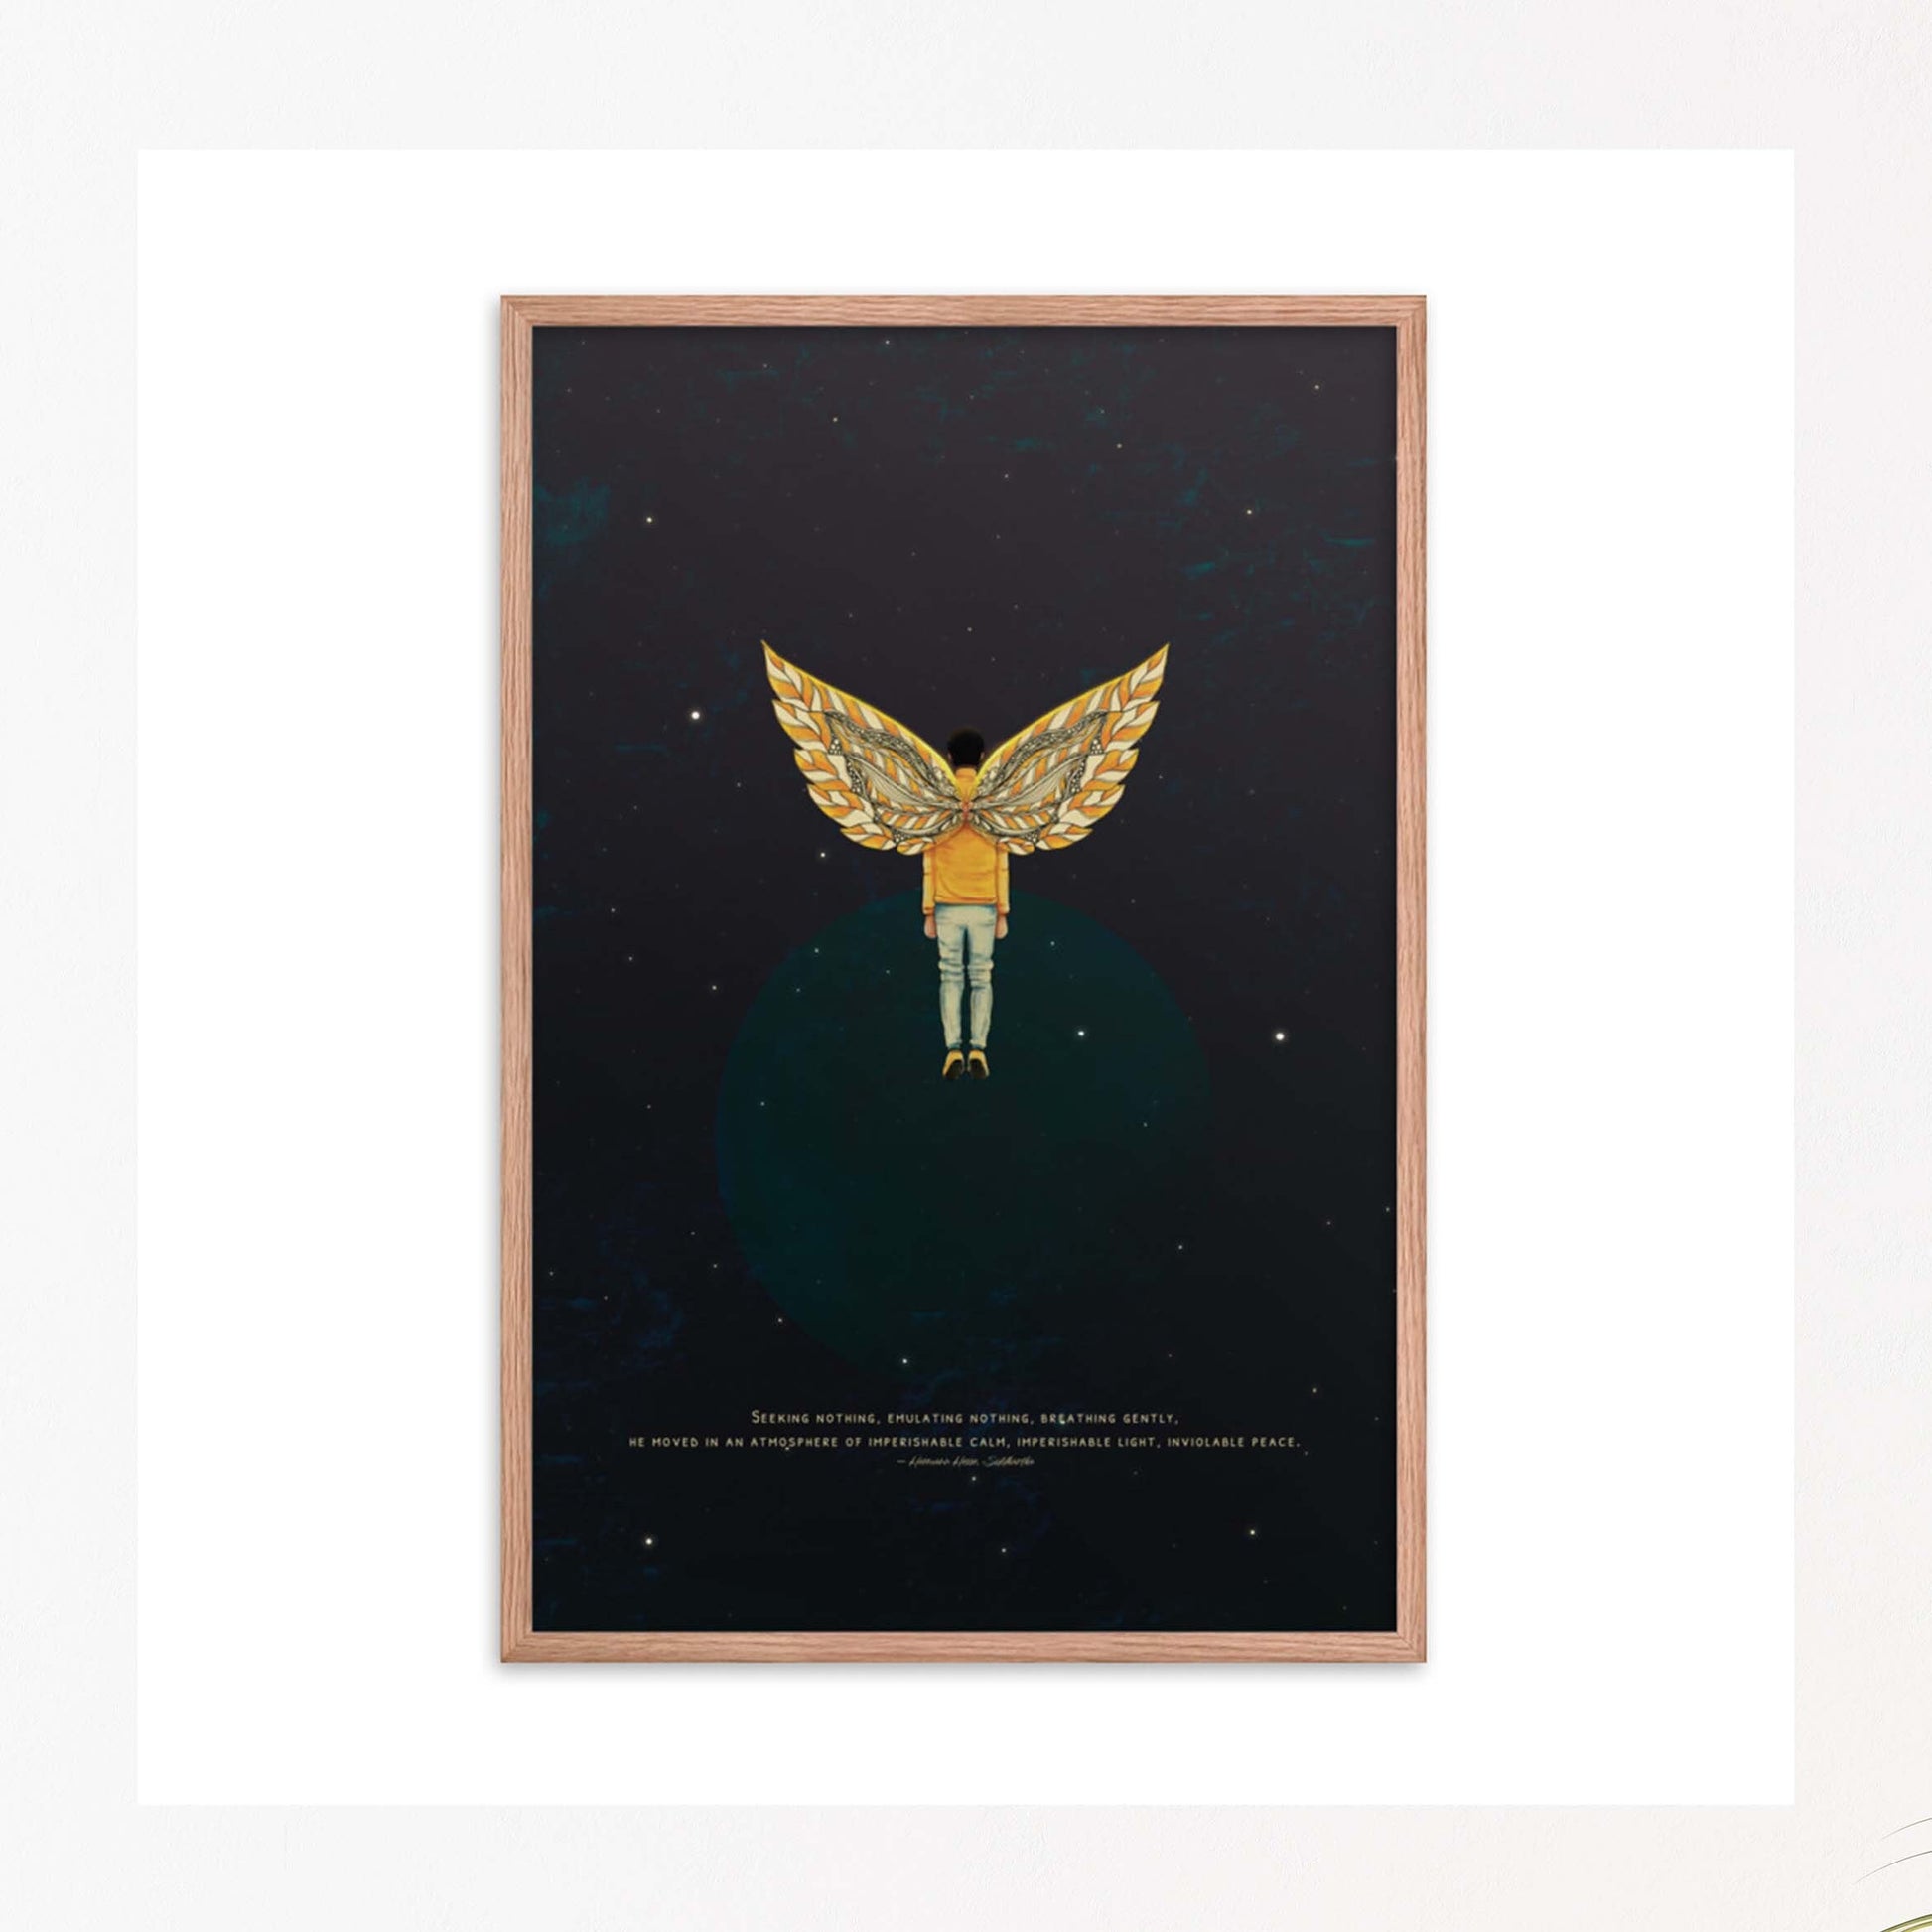 Man with wings wall art with siddhartha quote in oak frame.